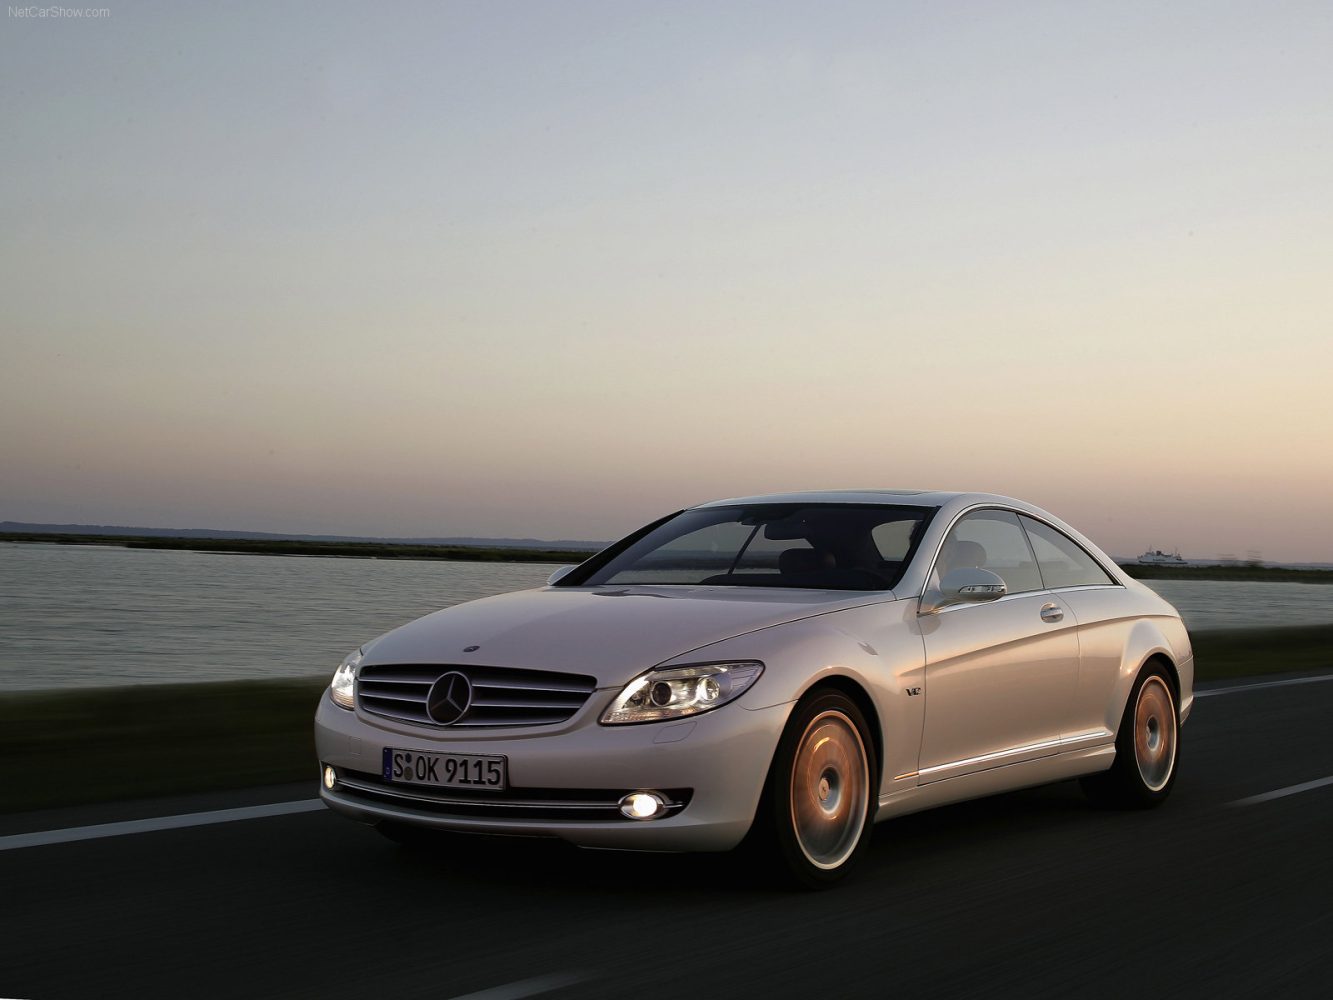 Underrated Ride Of The Week- Mercedes-Benz CL600 - The AutoTempest Blog